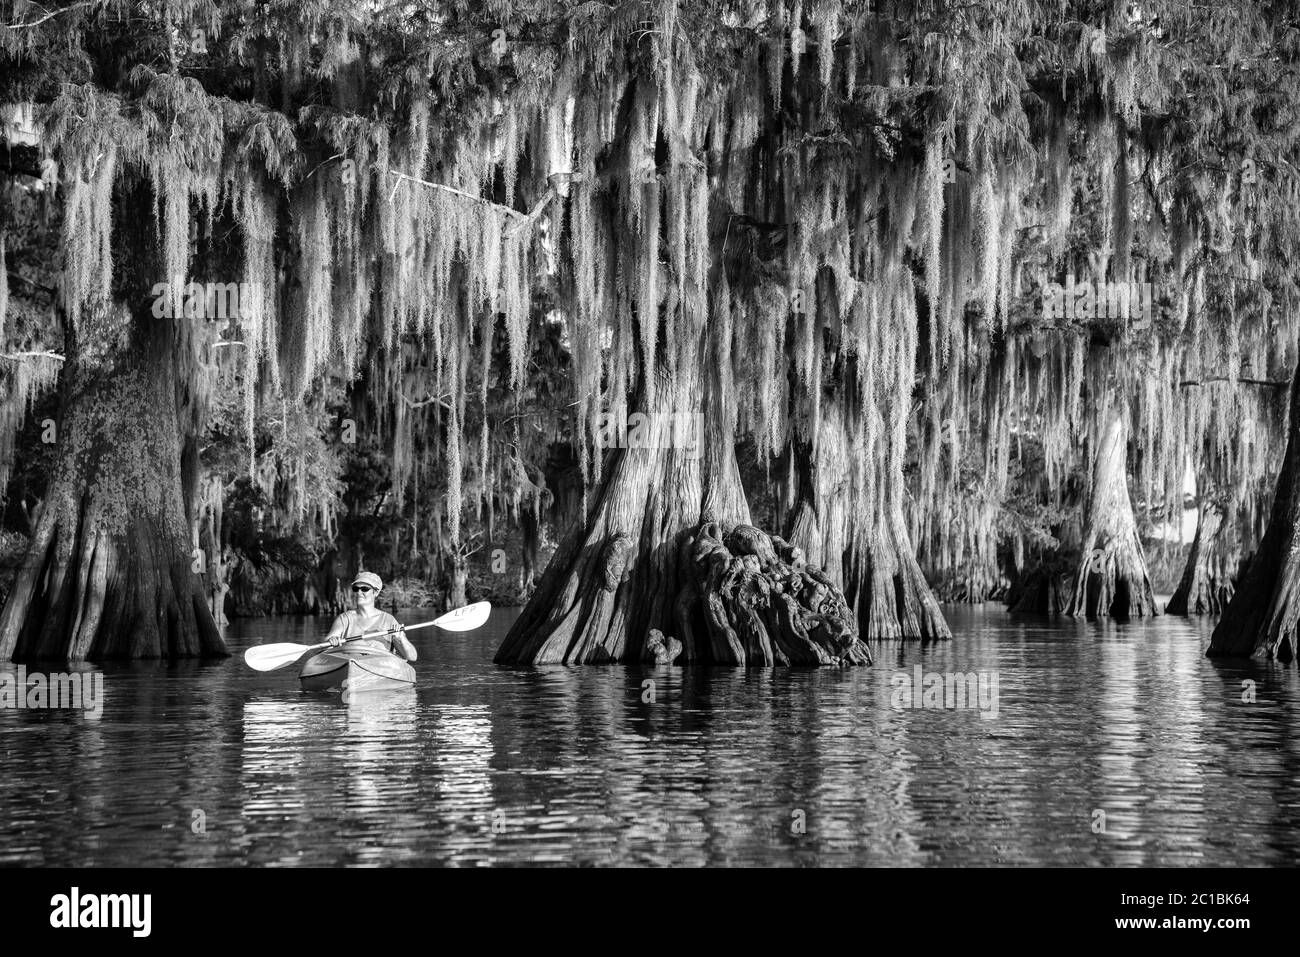 USA, Louisiana, Jefferson Parish,St.Martinville, Lake Fausse, woman in kayak in old growth forest MR Stock Photo